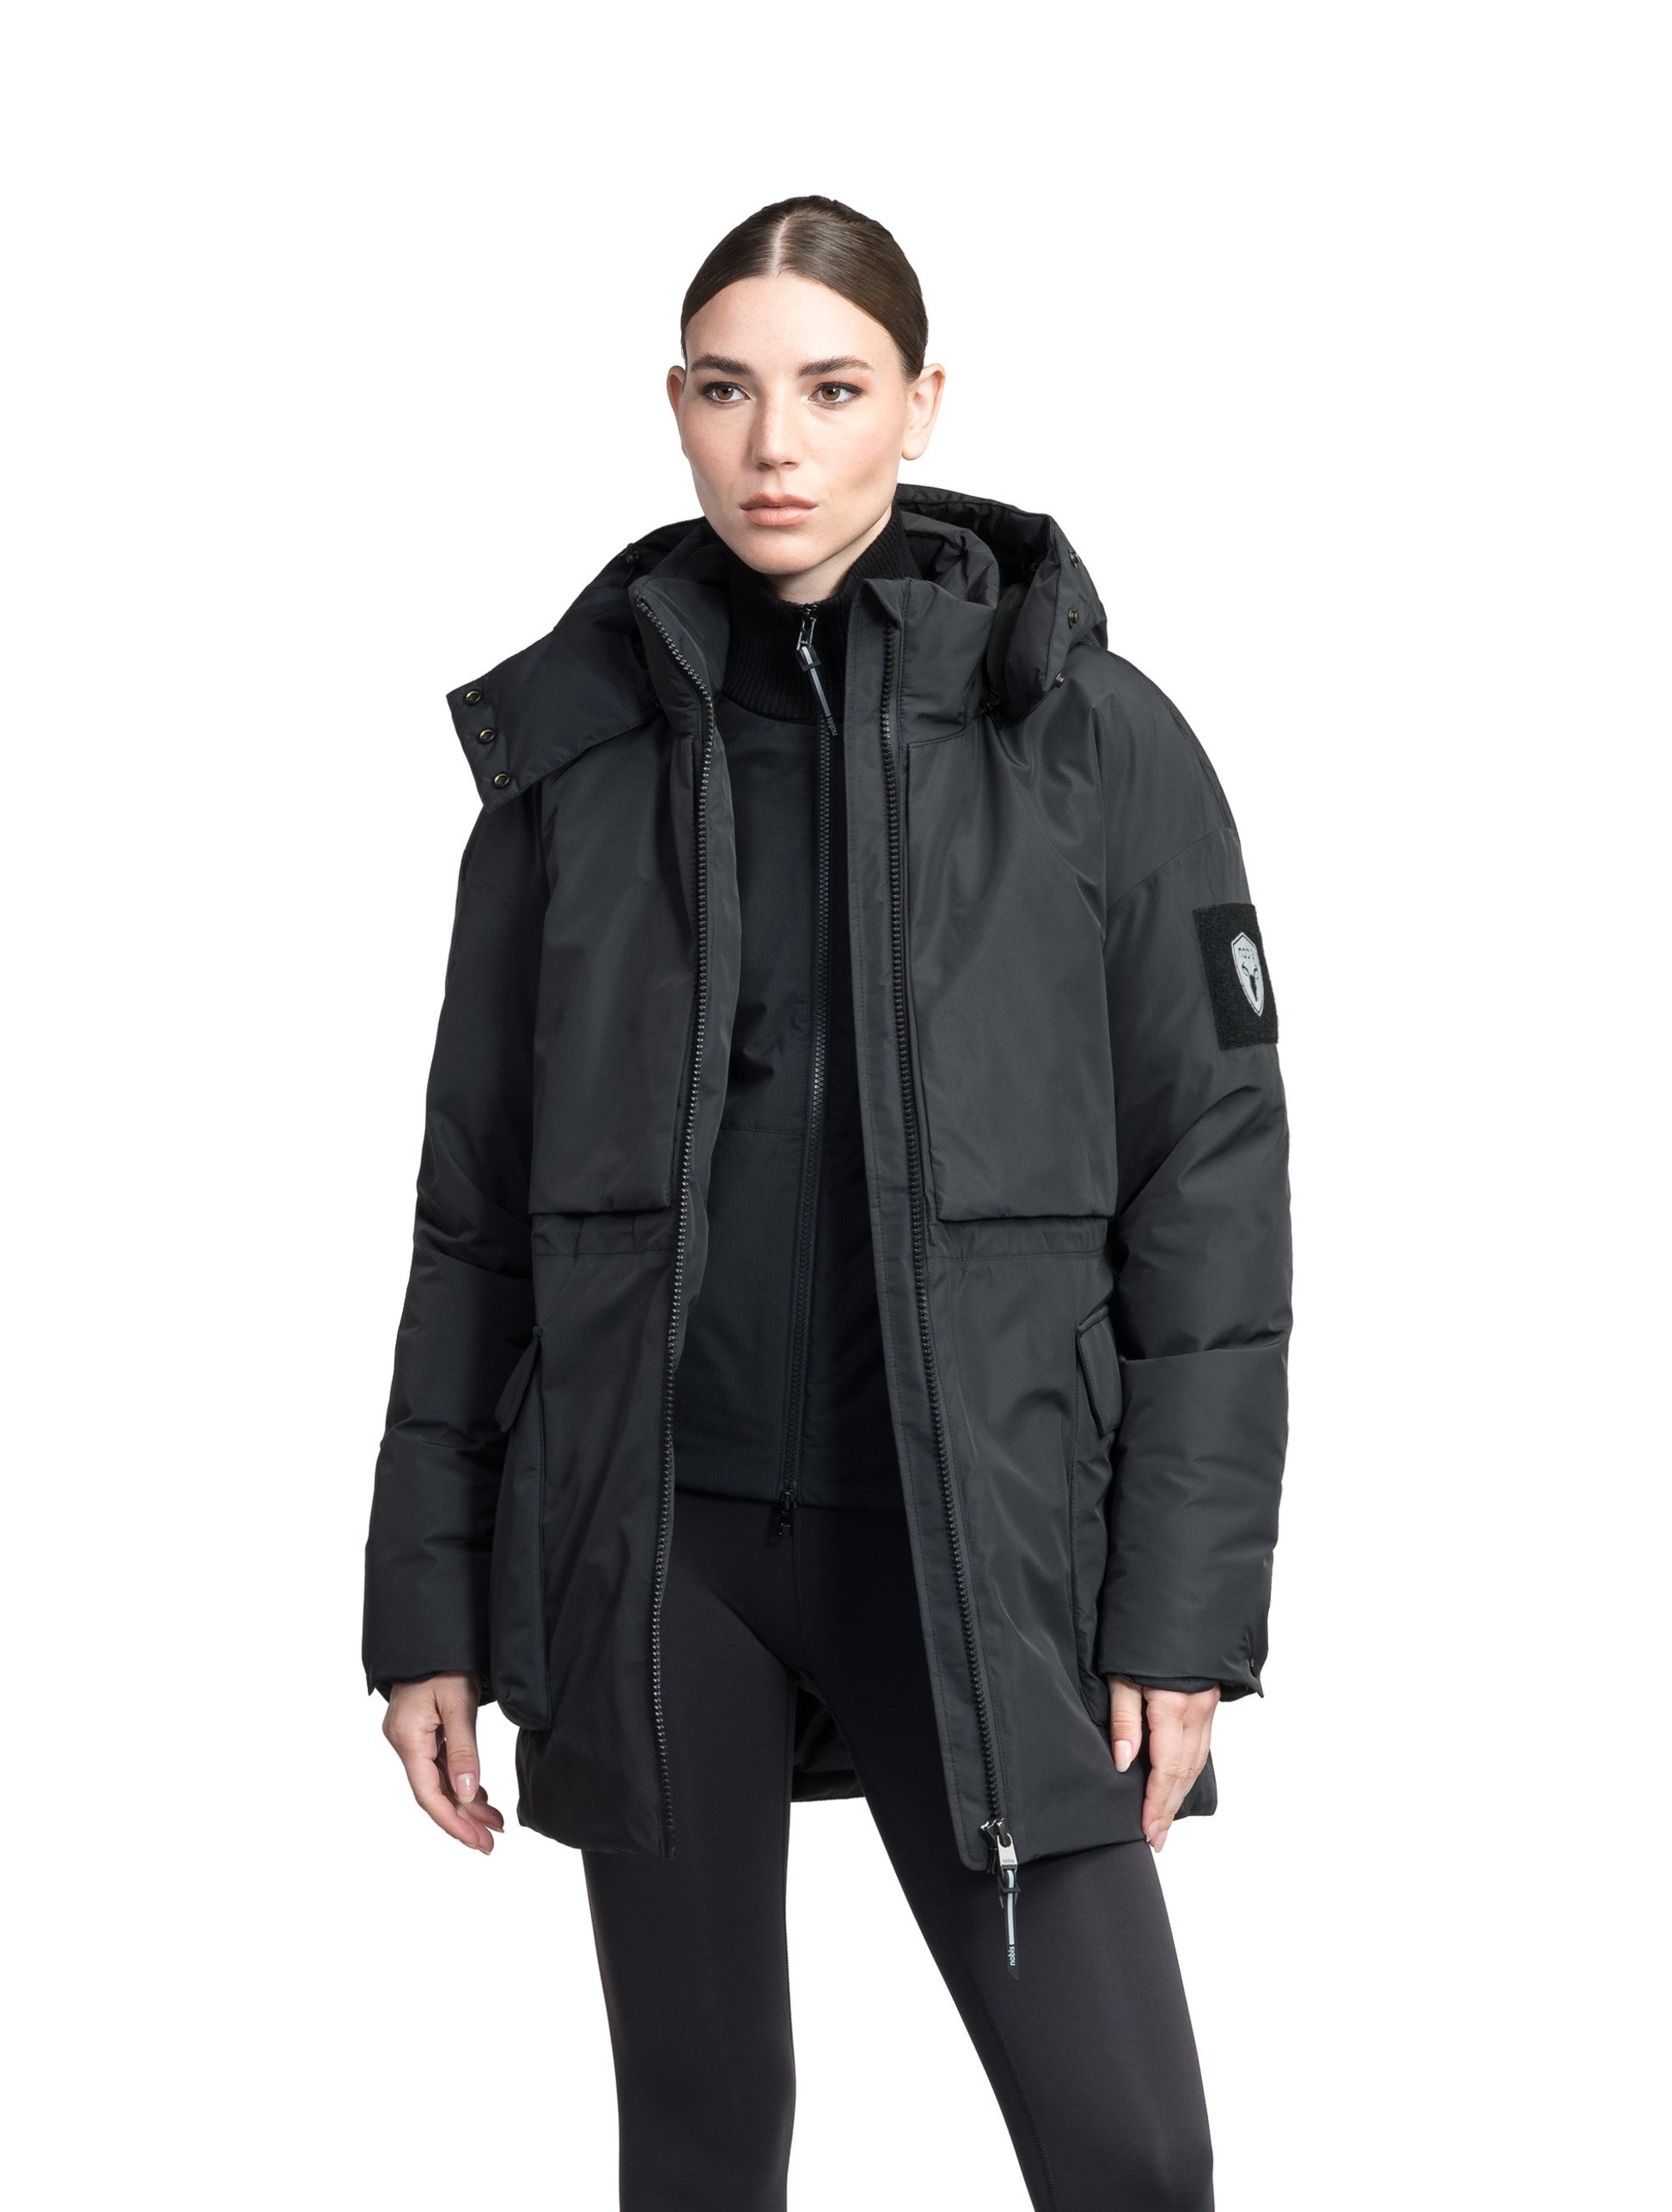 Haelyn Ladies Short Utility Parka in thigh length, 3-Ply Micro Denier fabrication, Premium Canadian White Duck Down insulation, removable down-filled hood, two-way centre front zipper, hidden adjustable cord at waist, adjustable snap cuffs, and four exterior patch pockets at front, in Black